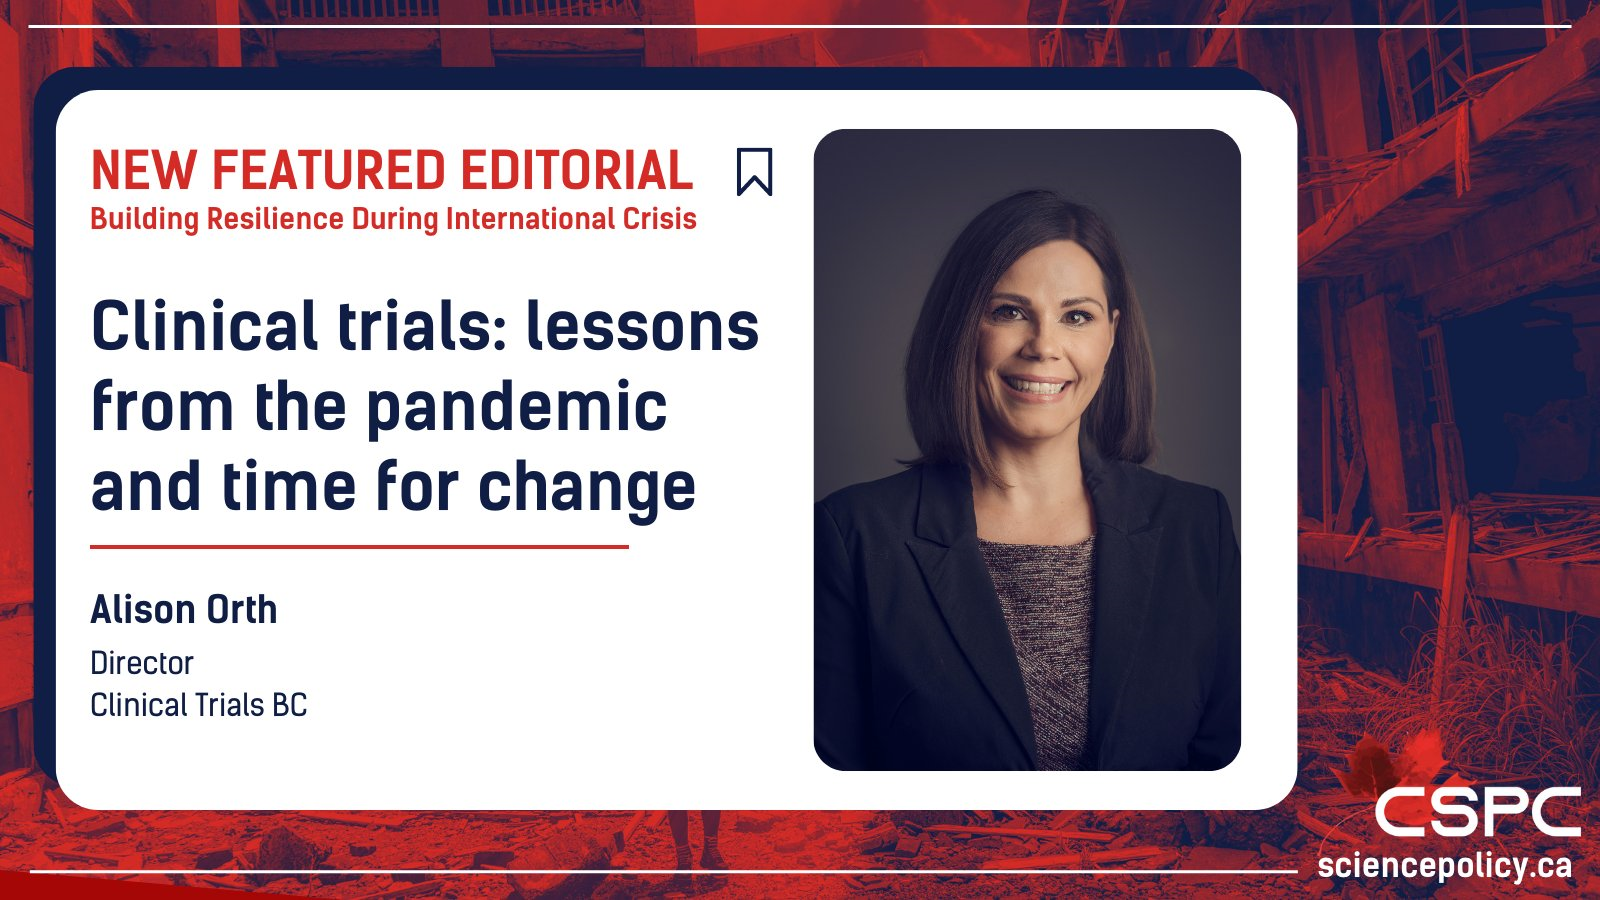 Clinical trials: lessons from the pandemic and time for change